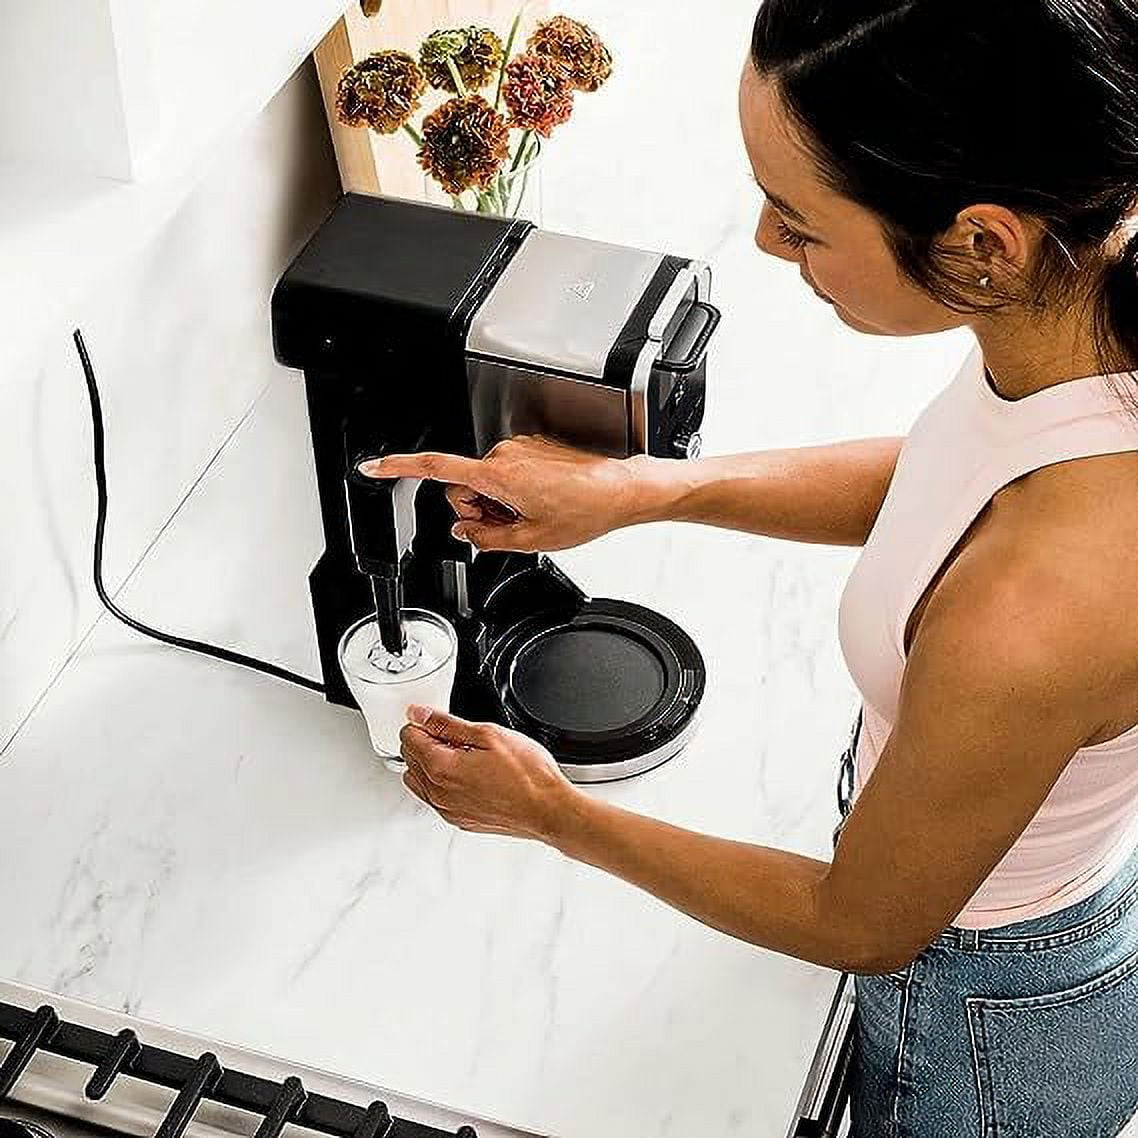 Ninja's 14-cup DualBrew coffee maker supports pods/ground beans at $100  (Refurb, Orig. $230)